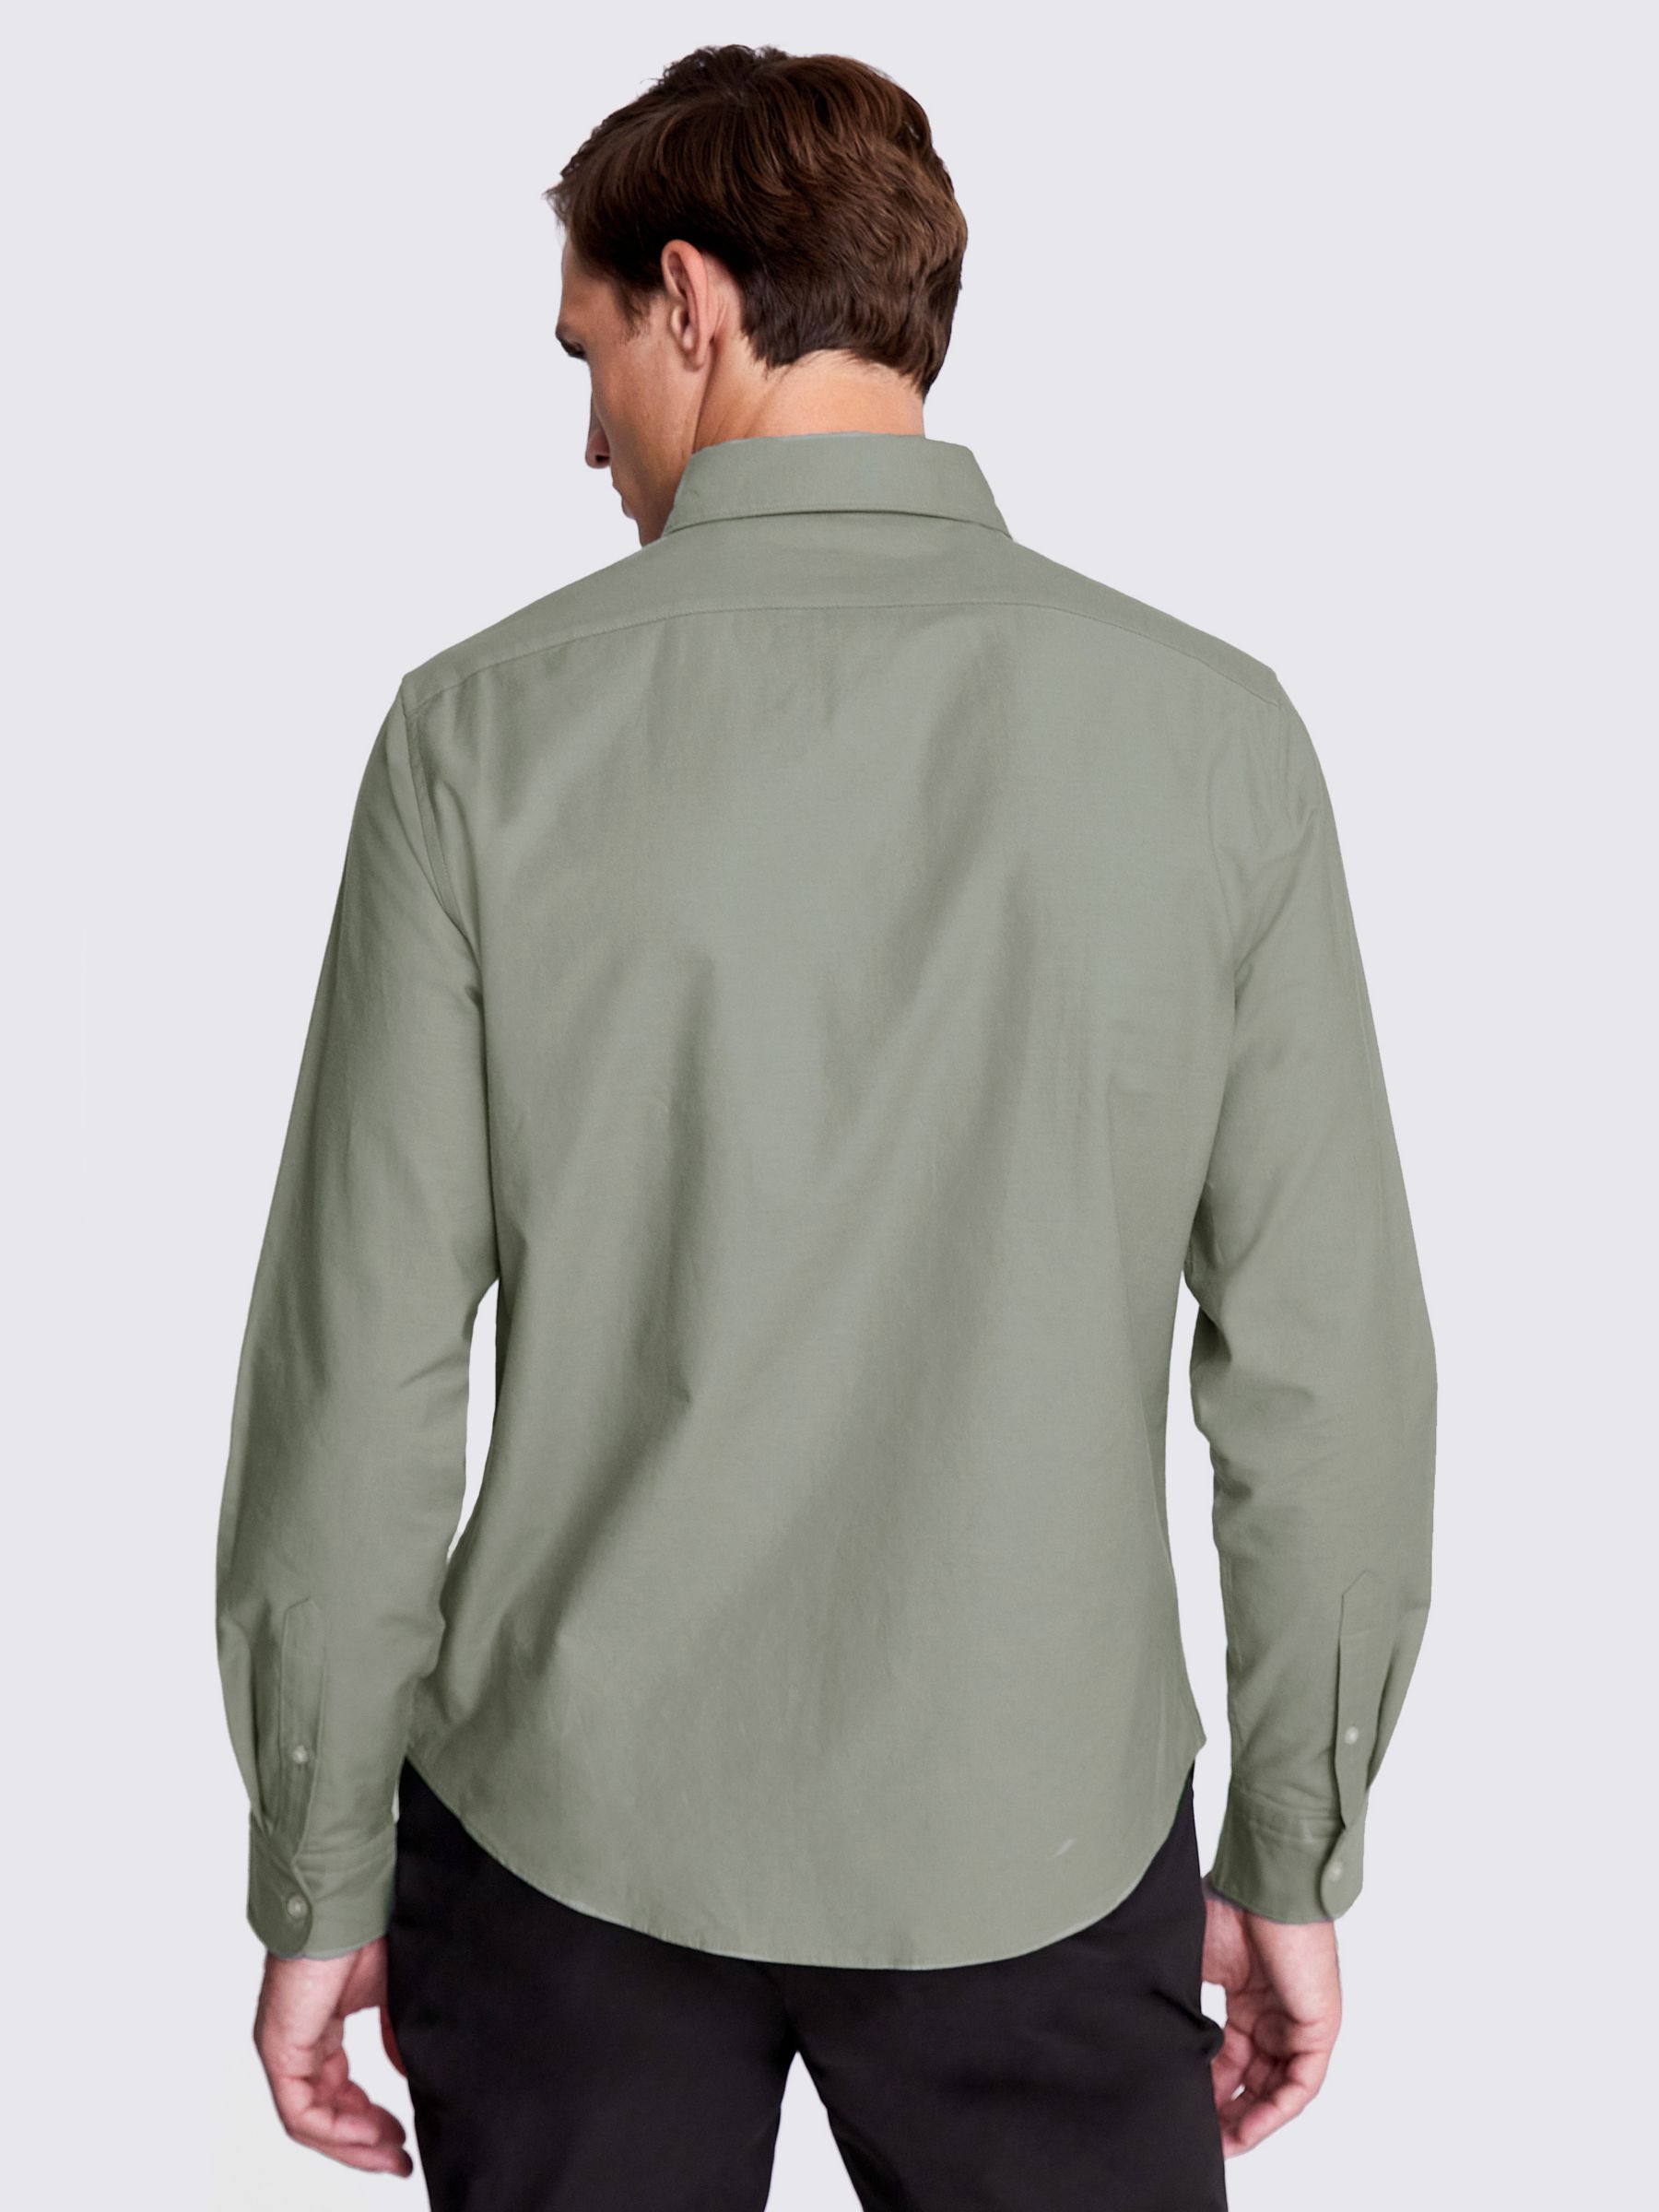 Moss Washed Oxford Shirt, Sage, S